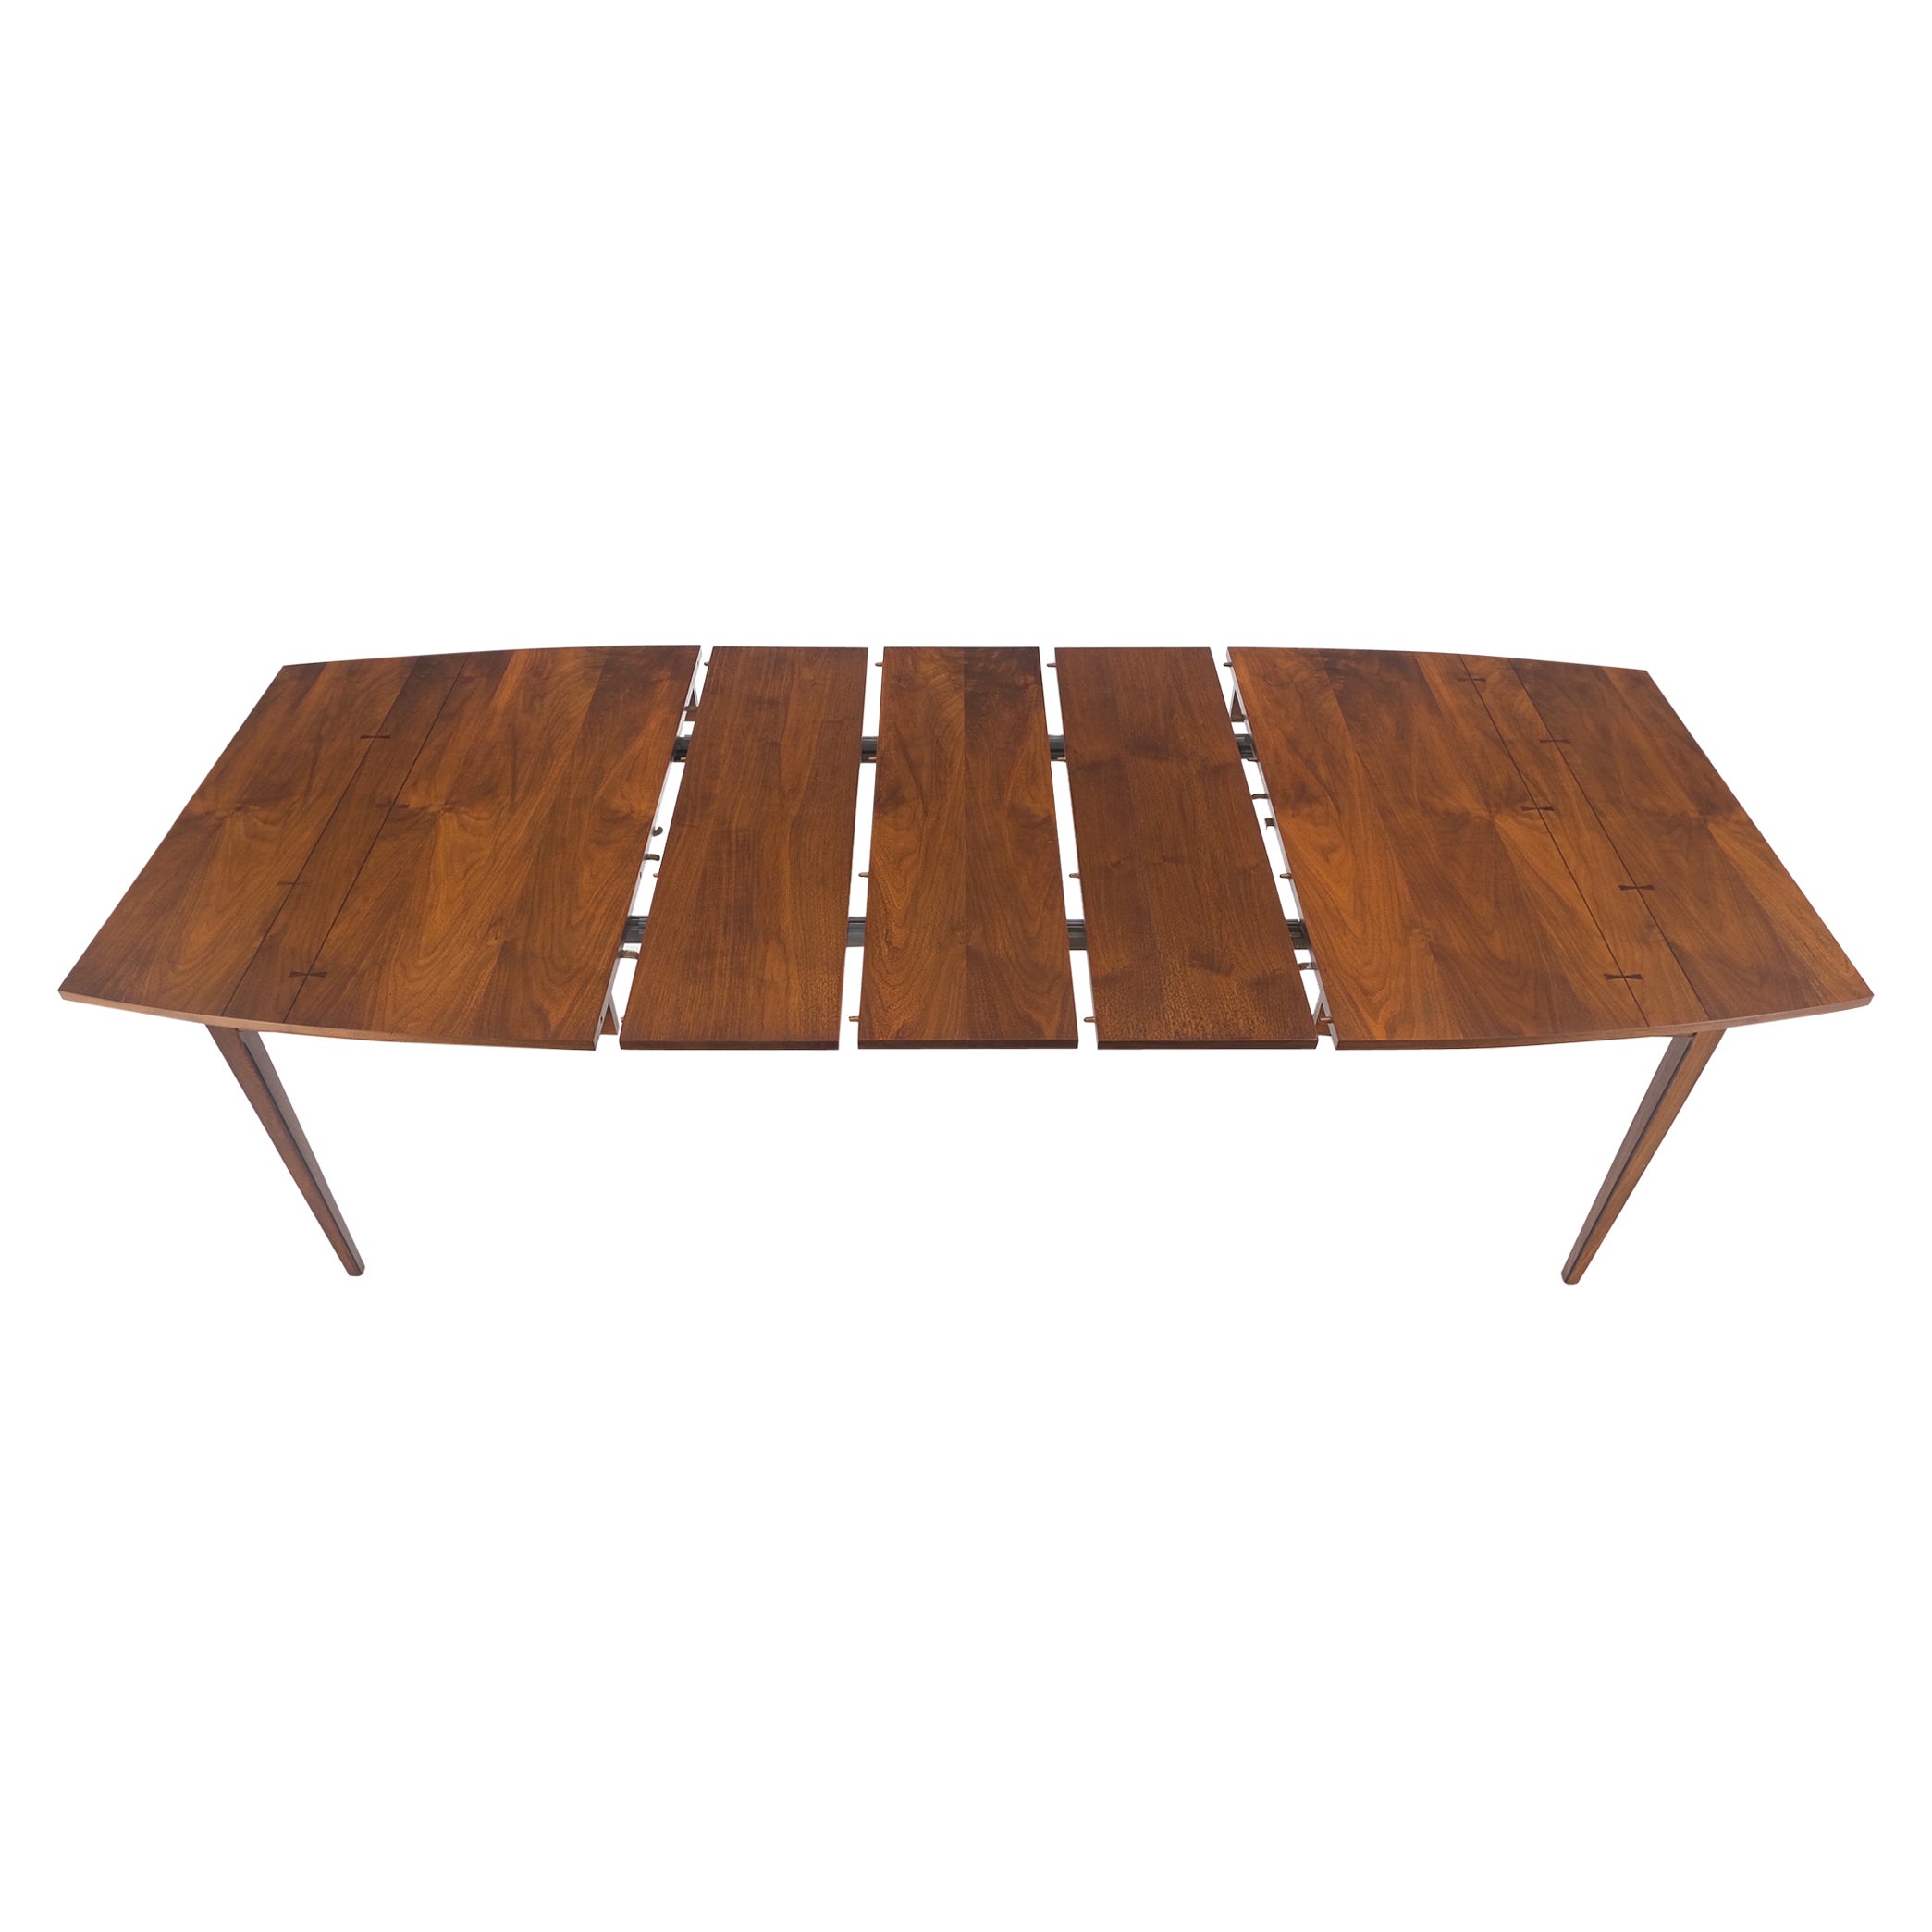 Danish Mid Century Modern Walnut Butterfly Accents Boat Shape Dining Table MINT! For Sale